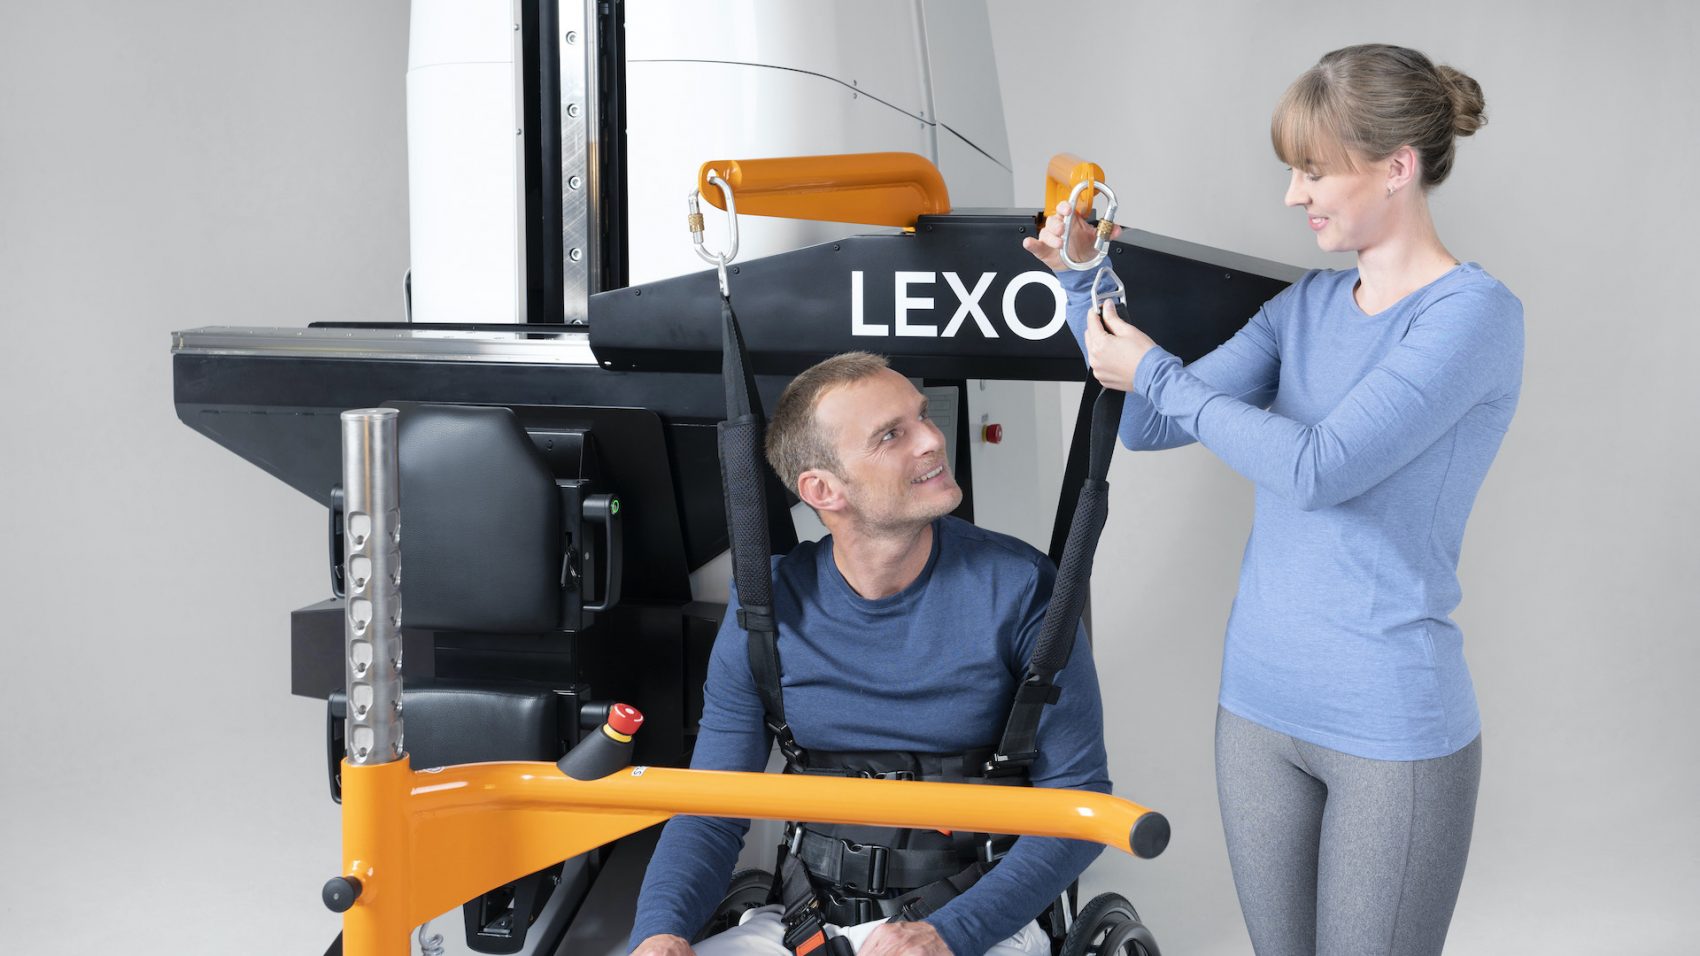 Suspension device from LEXO, patient in wheelchair